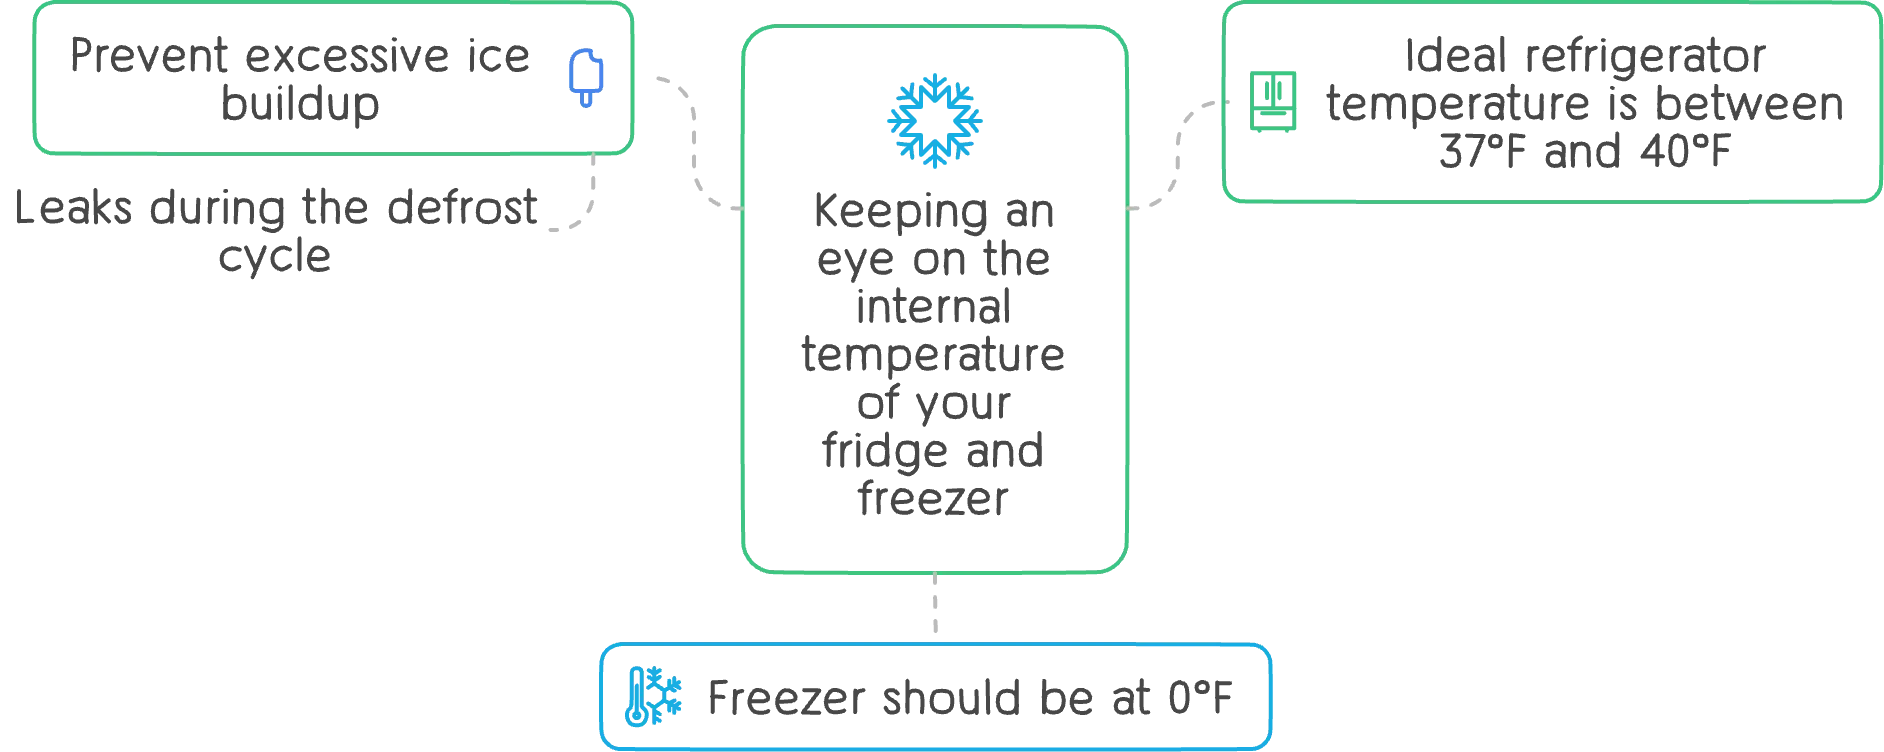 Diagram of a refrigerator with recommended temperature zones. The ideal refrigerator temperature is between 37°F and 40°F. Leaks during the defrost cycle and keeping an eye on the internal temperature of your fridge and freezer are important for maintaining food safety. The freezer should be set to 0°F.